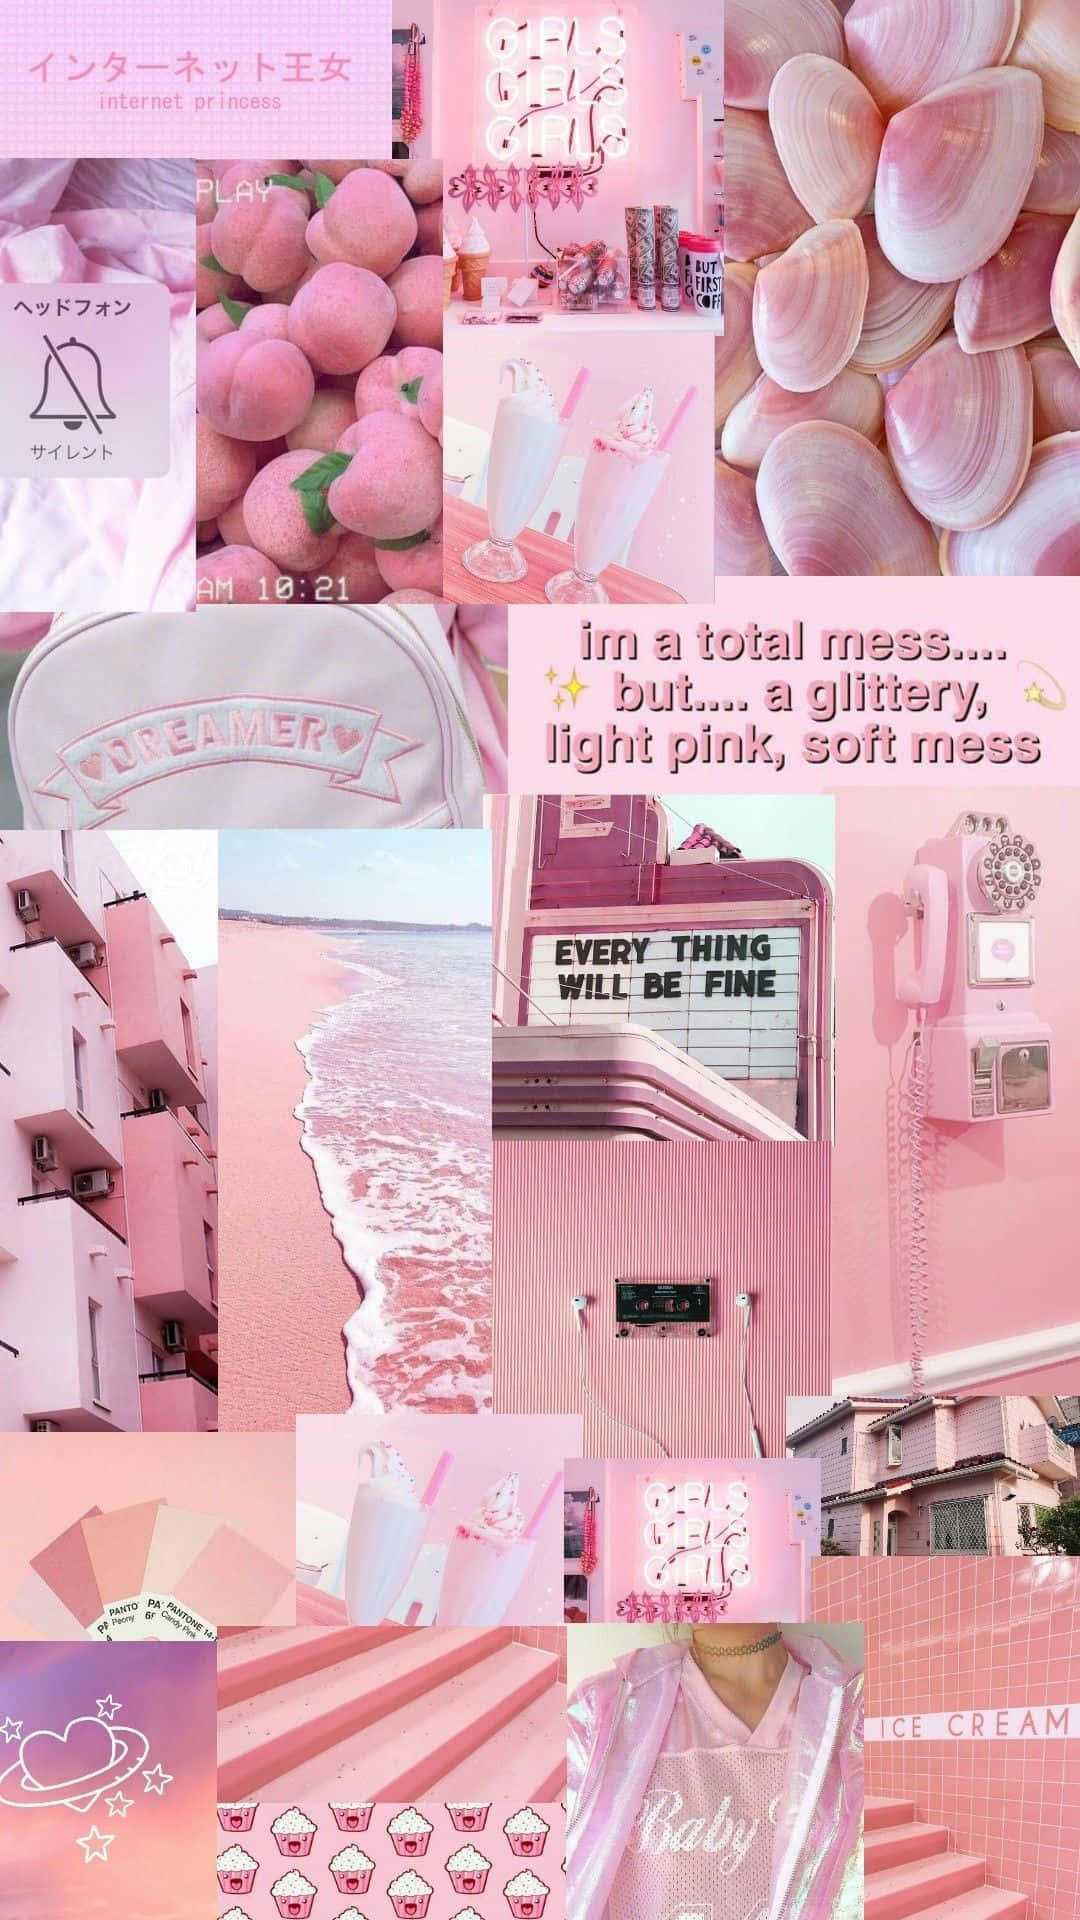 Soft Girl Aesthetic Outfit featuring a Pastel Color Palette Wallpaper